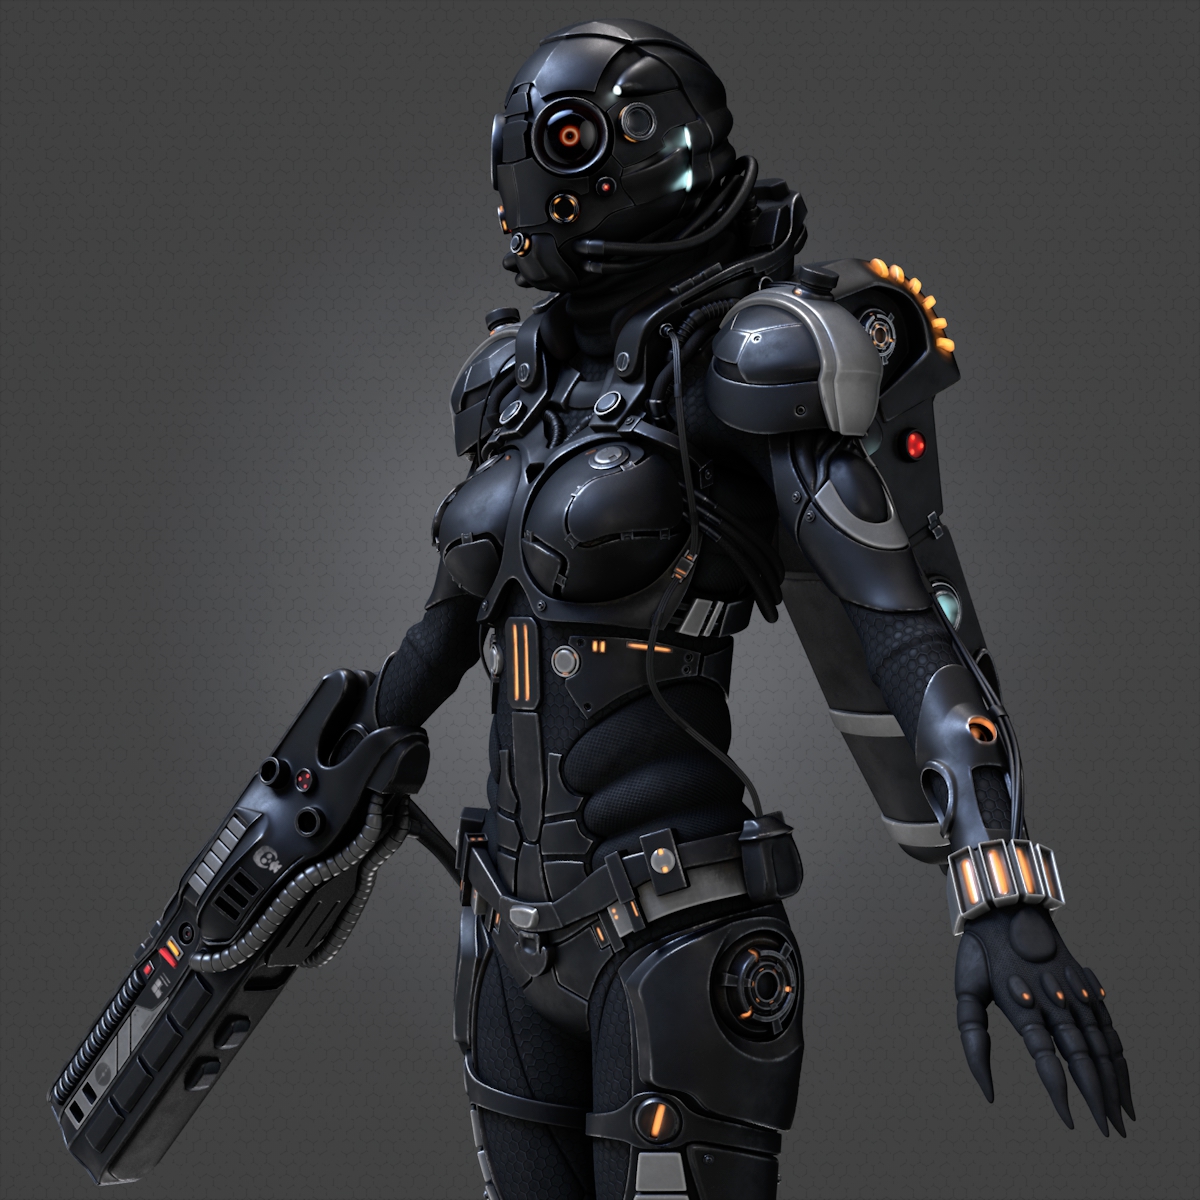 Cibo Blame cinema4d turntable 3d modeling texturing Uv mapping sci-fi girl Fly exoskeleton Weapon Iron Armor 3D Character